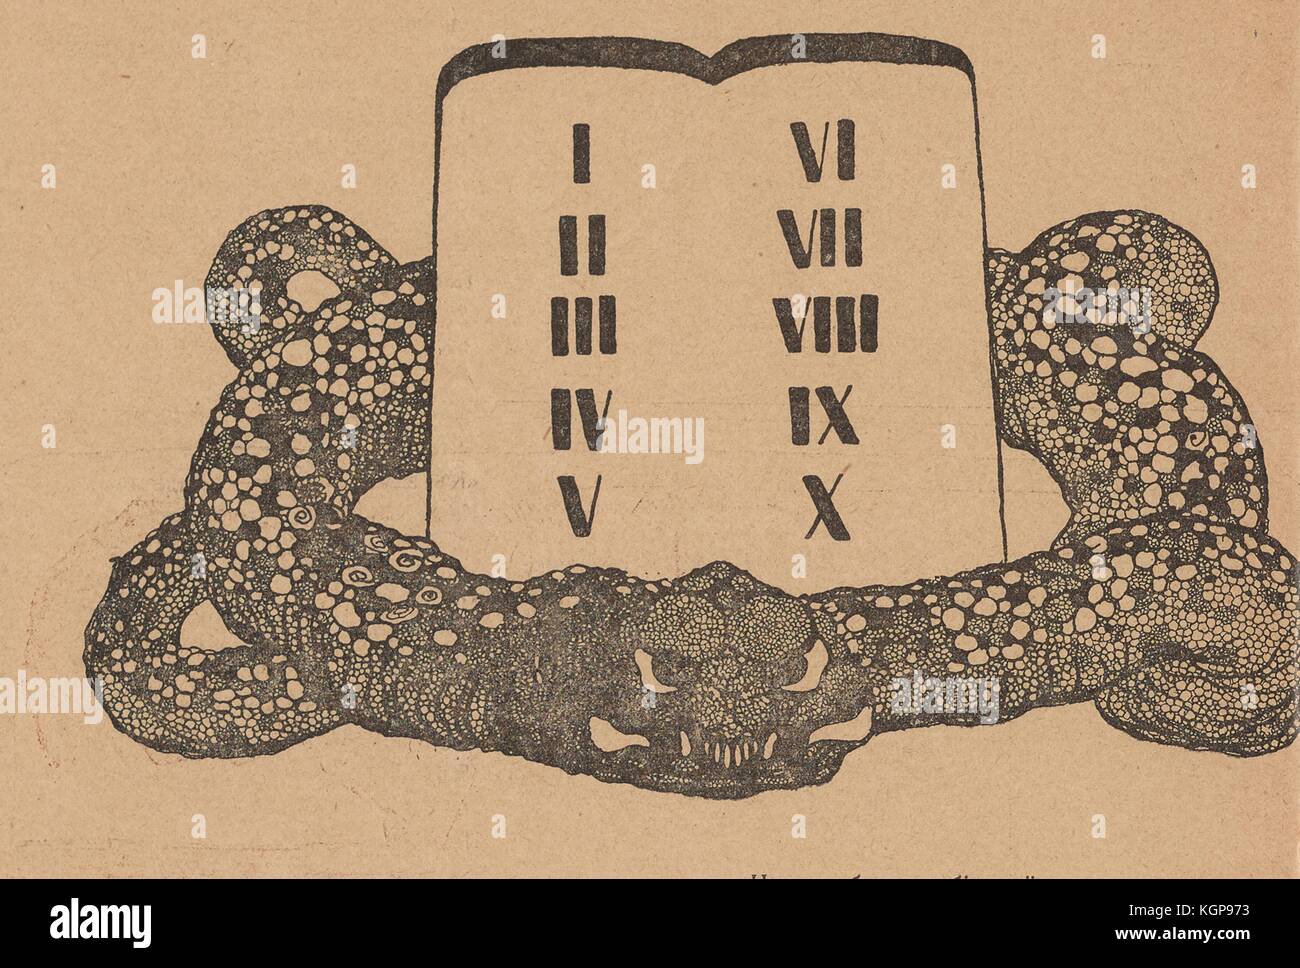 Illustration from the Russian satirical journal Maski (Masks) depicting a snake, likely the serpent in Eden, wrapped around two joined tablets with the roman numerals for numbers one through ten written on them, representing the Ten Commandments, 1906. Stock Photo